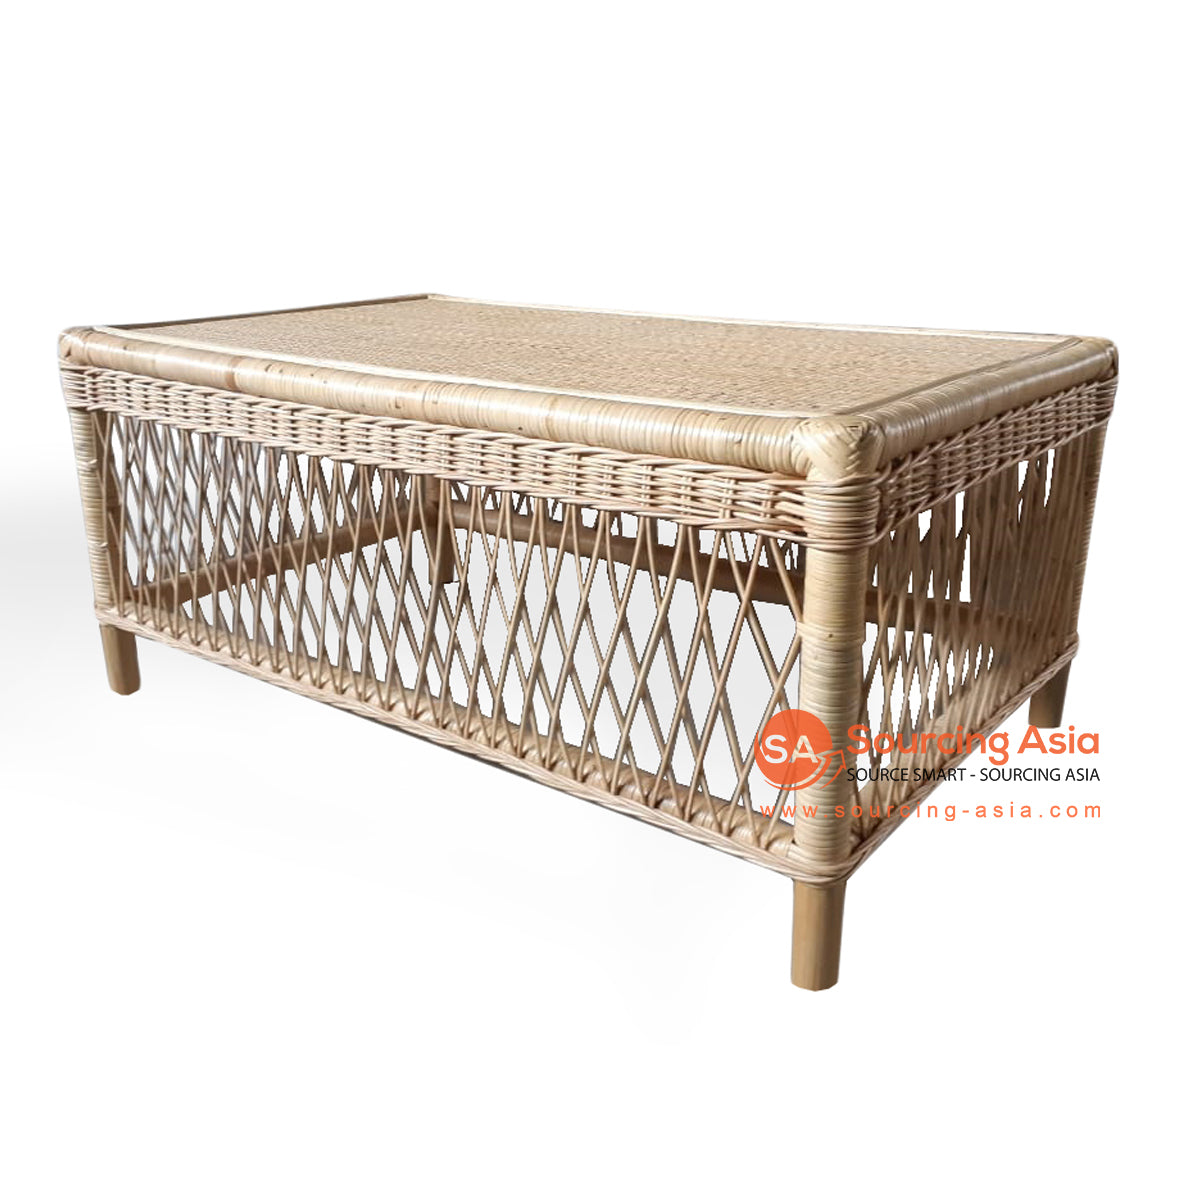 Bnt234 Natural Rattan Tight Weave Cane Coffee Table Sourcing Asia